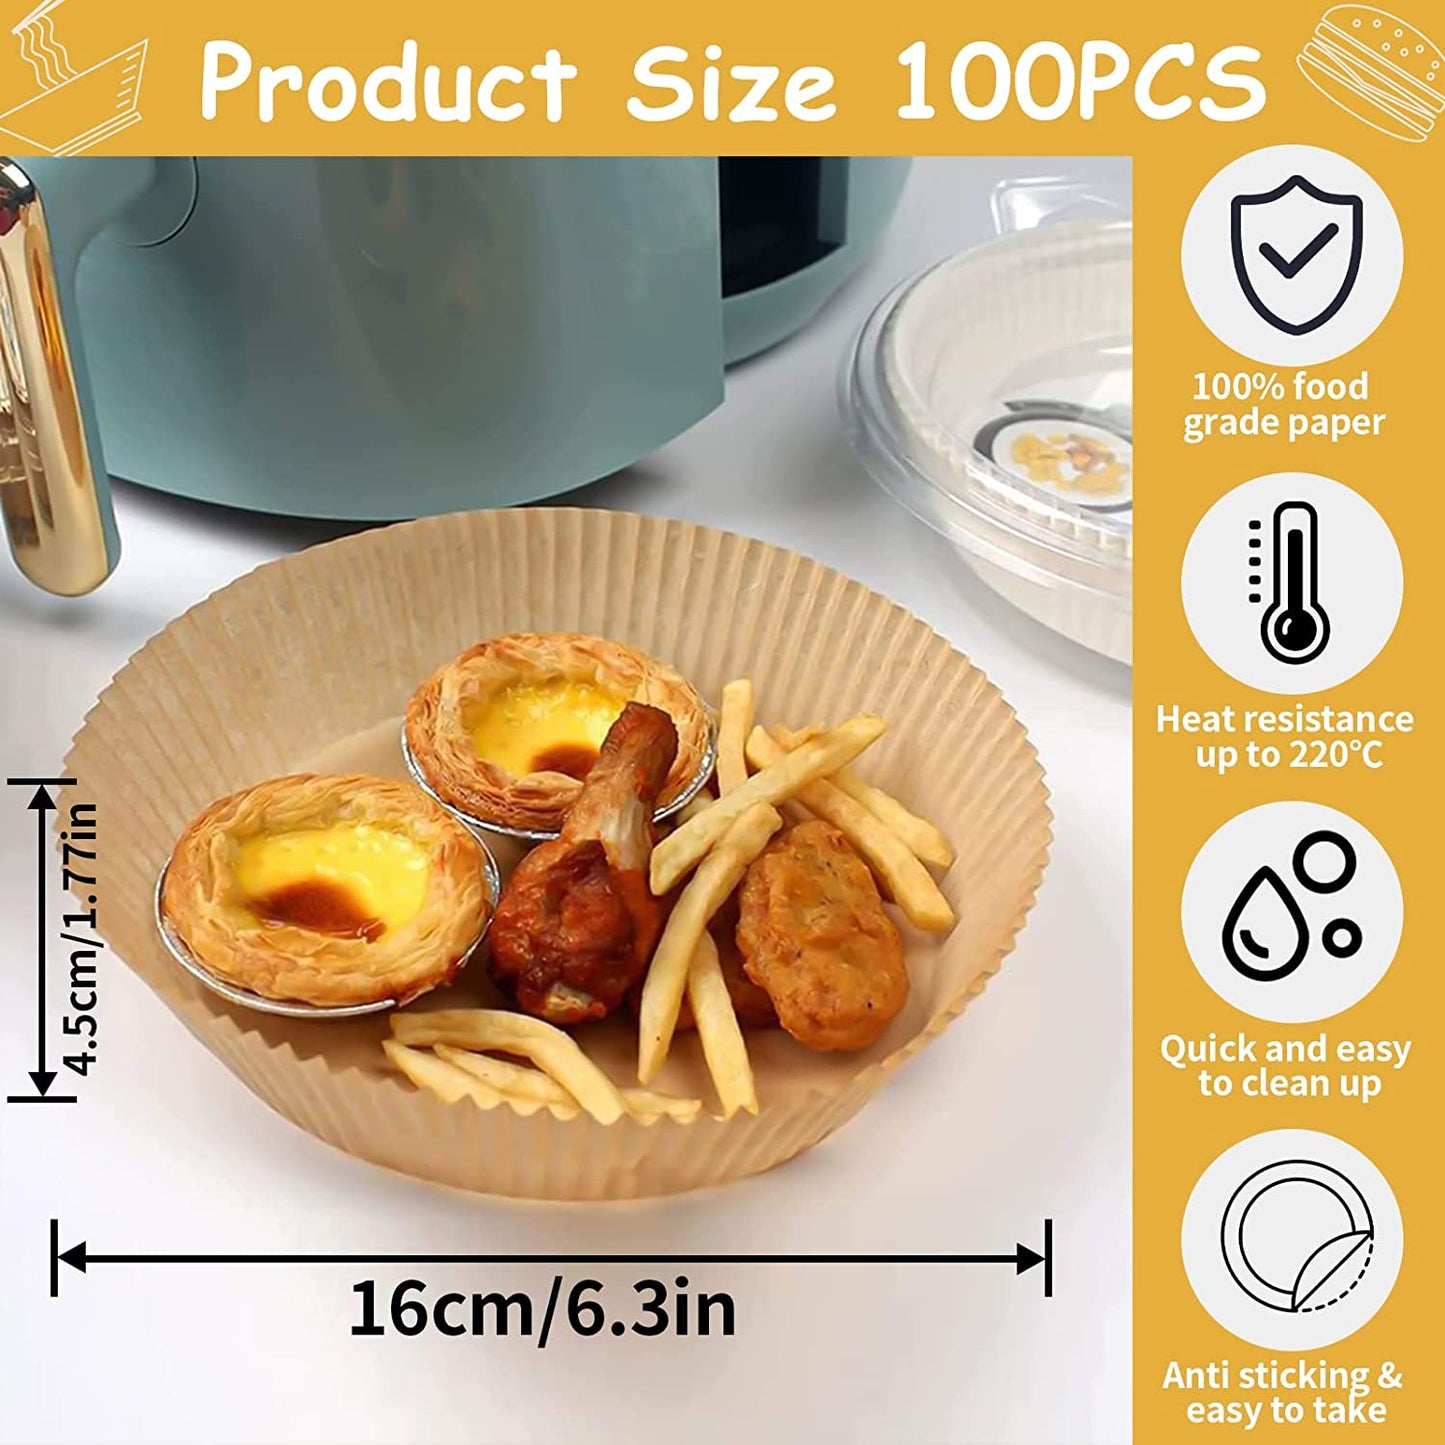 Air Fryer Disposable Liners Art 100PCS Nonstick Food Grade Baking Paper, Oil-proof, Parchment Paper for Microwave Oven Frying Pan, 6.3inch Air Fryer Liners Round (100PCS Nature)